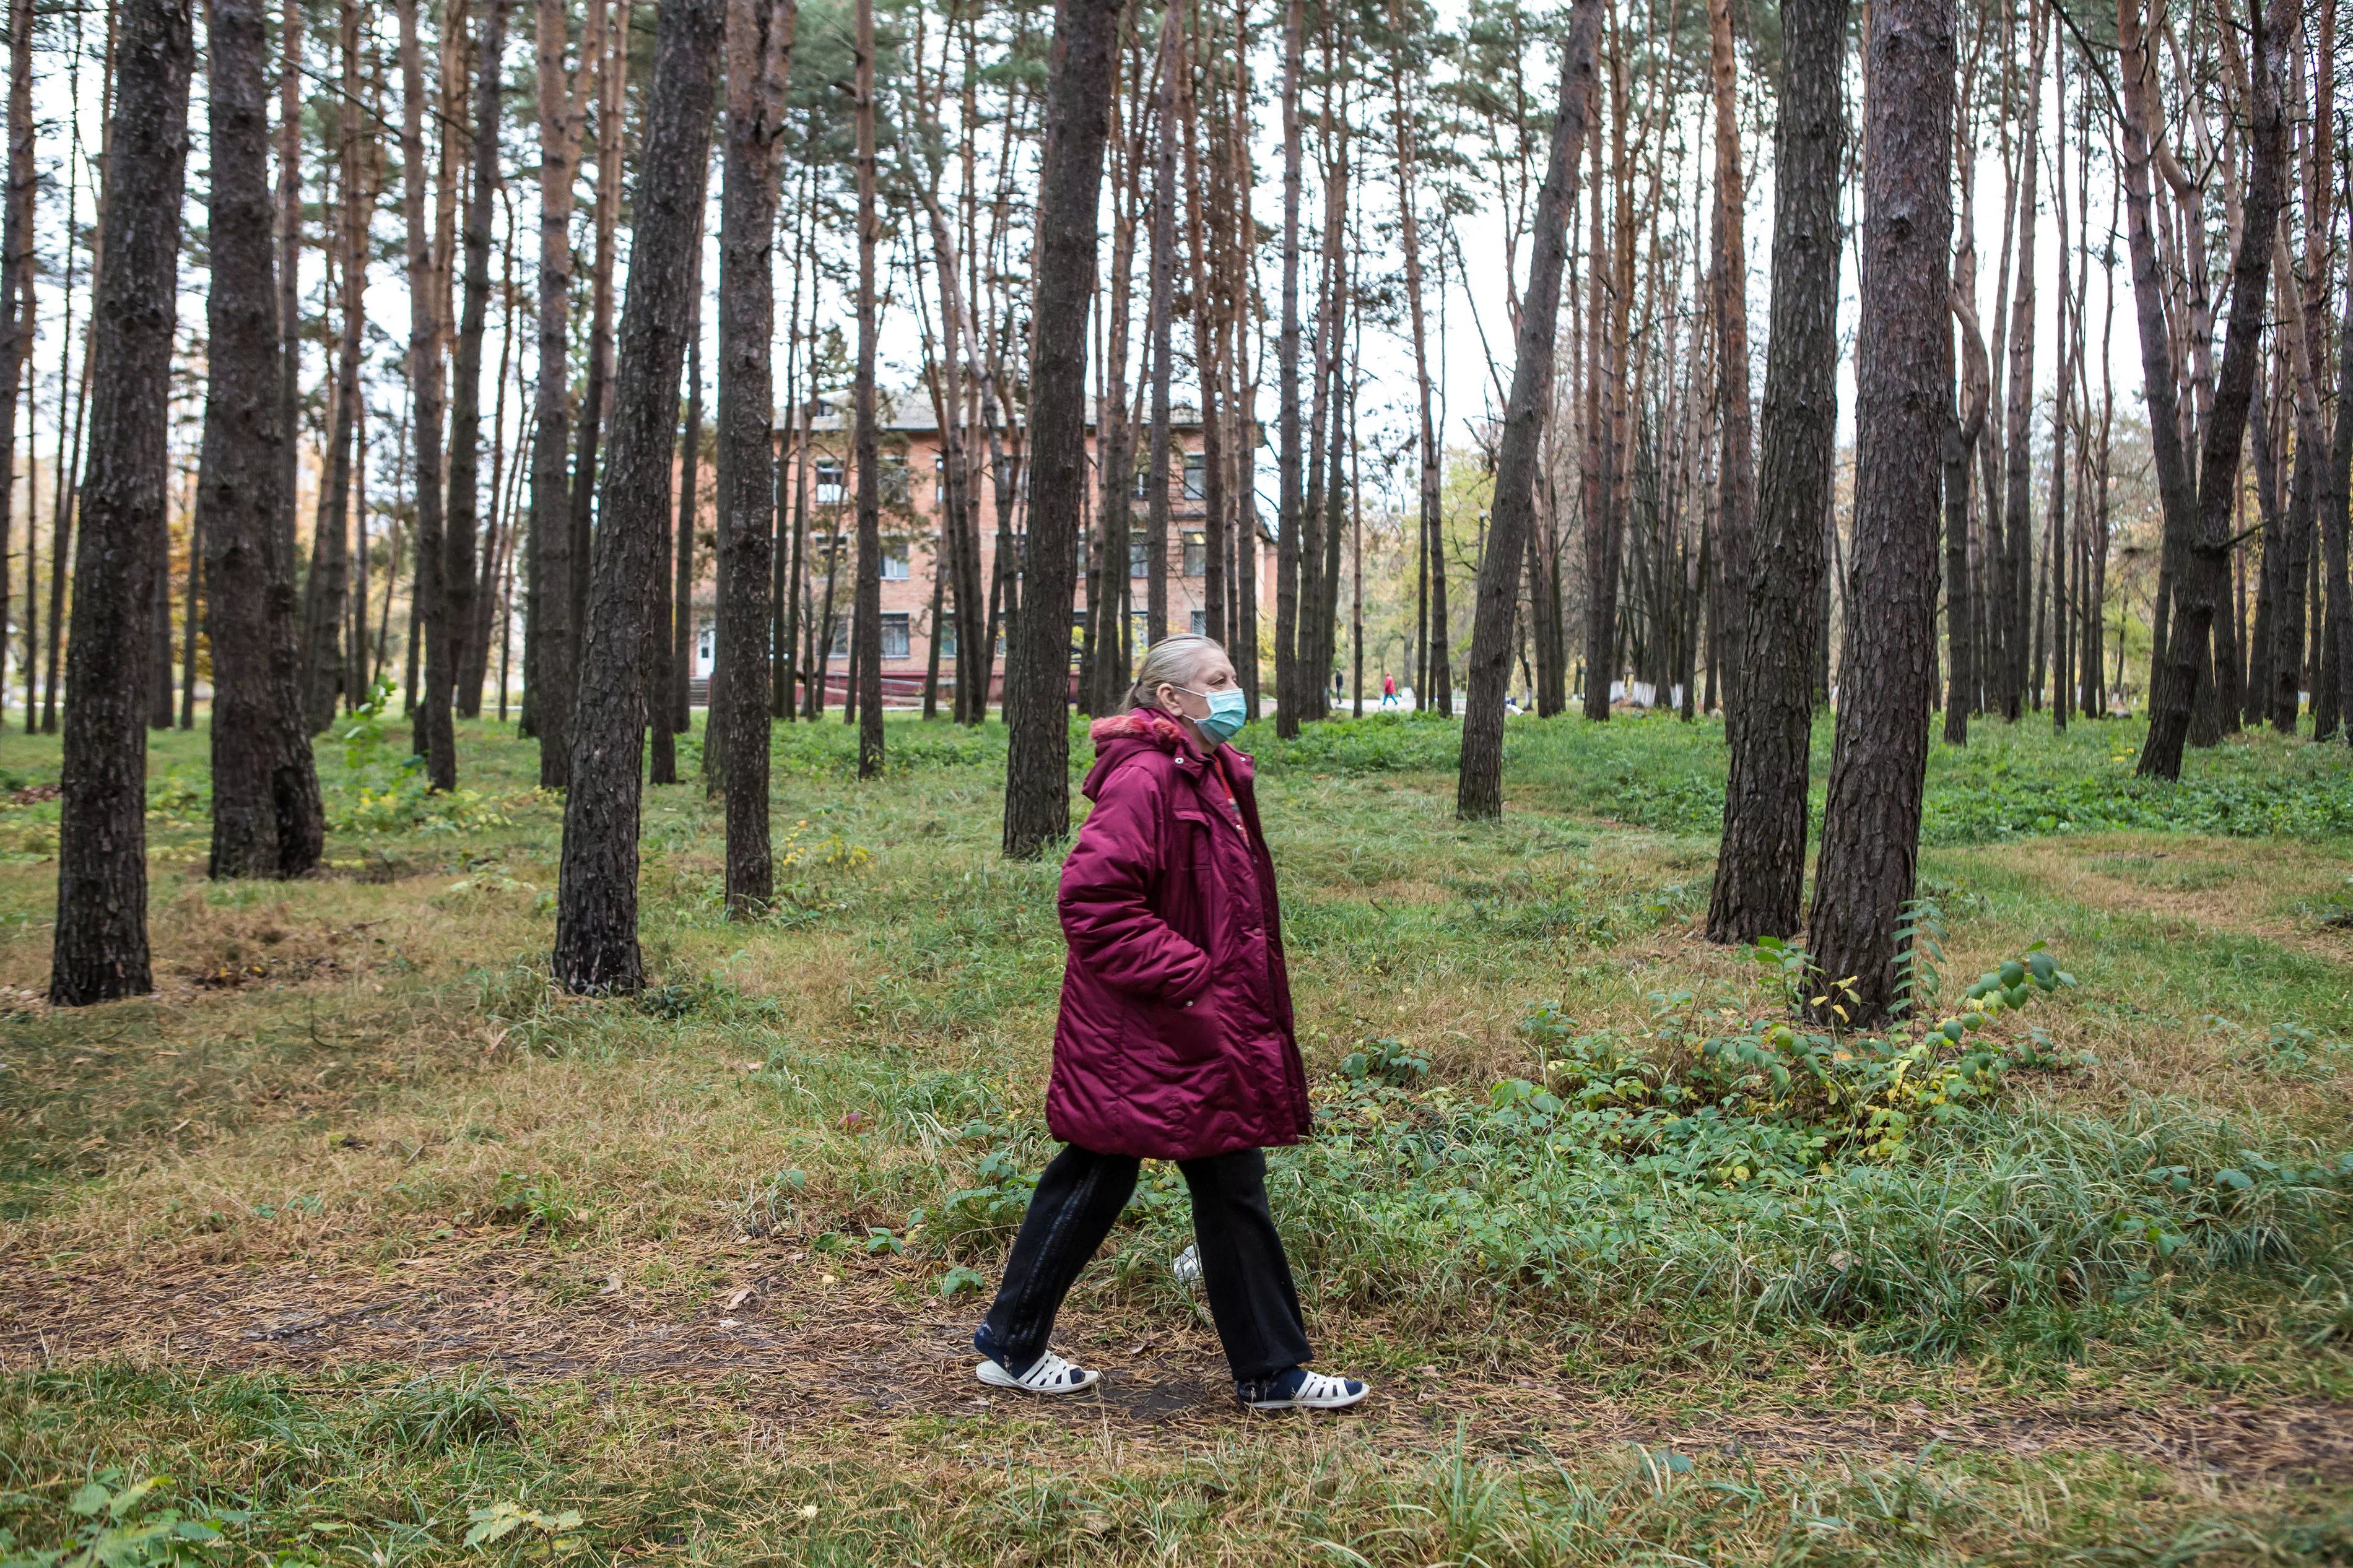 Halyna Uvarenko, 56, an MSF patient with multidrug-resistant TB (MDR-TB), walks in the forest around the Zhytomyr Regional TB Dispensary where she is receiving treatment. 